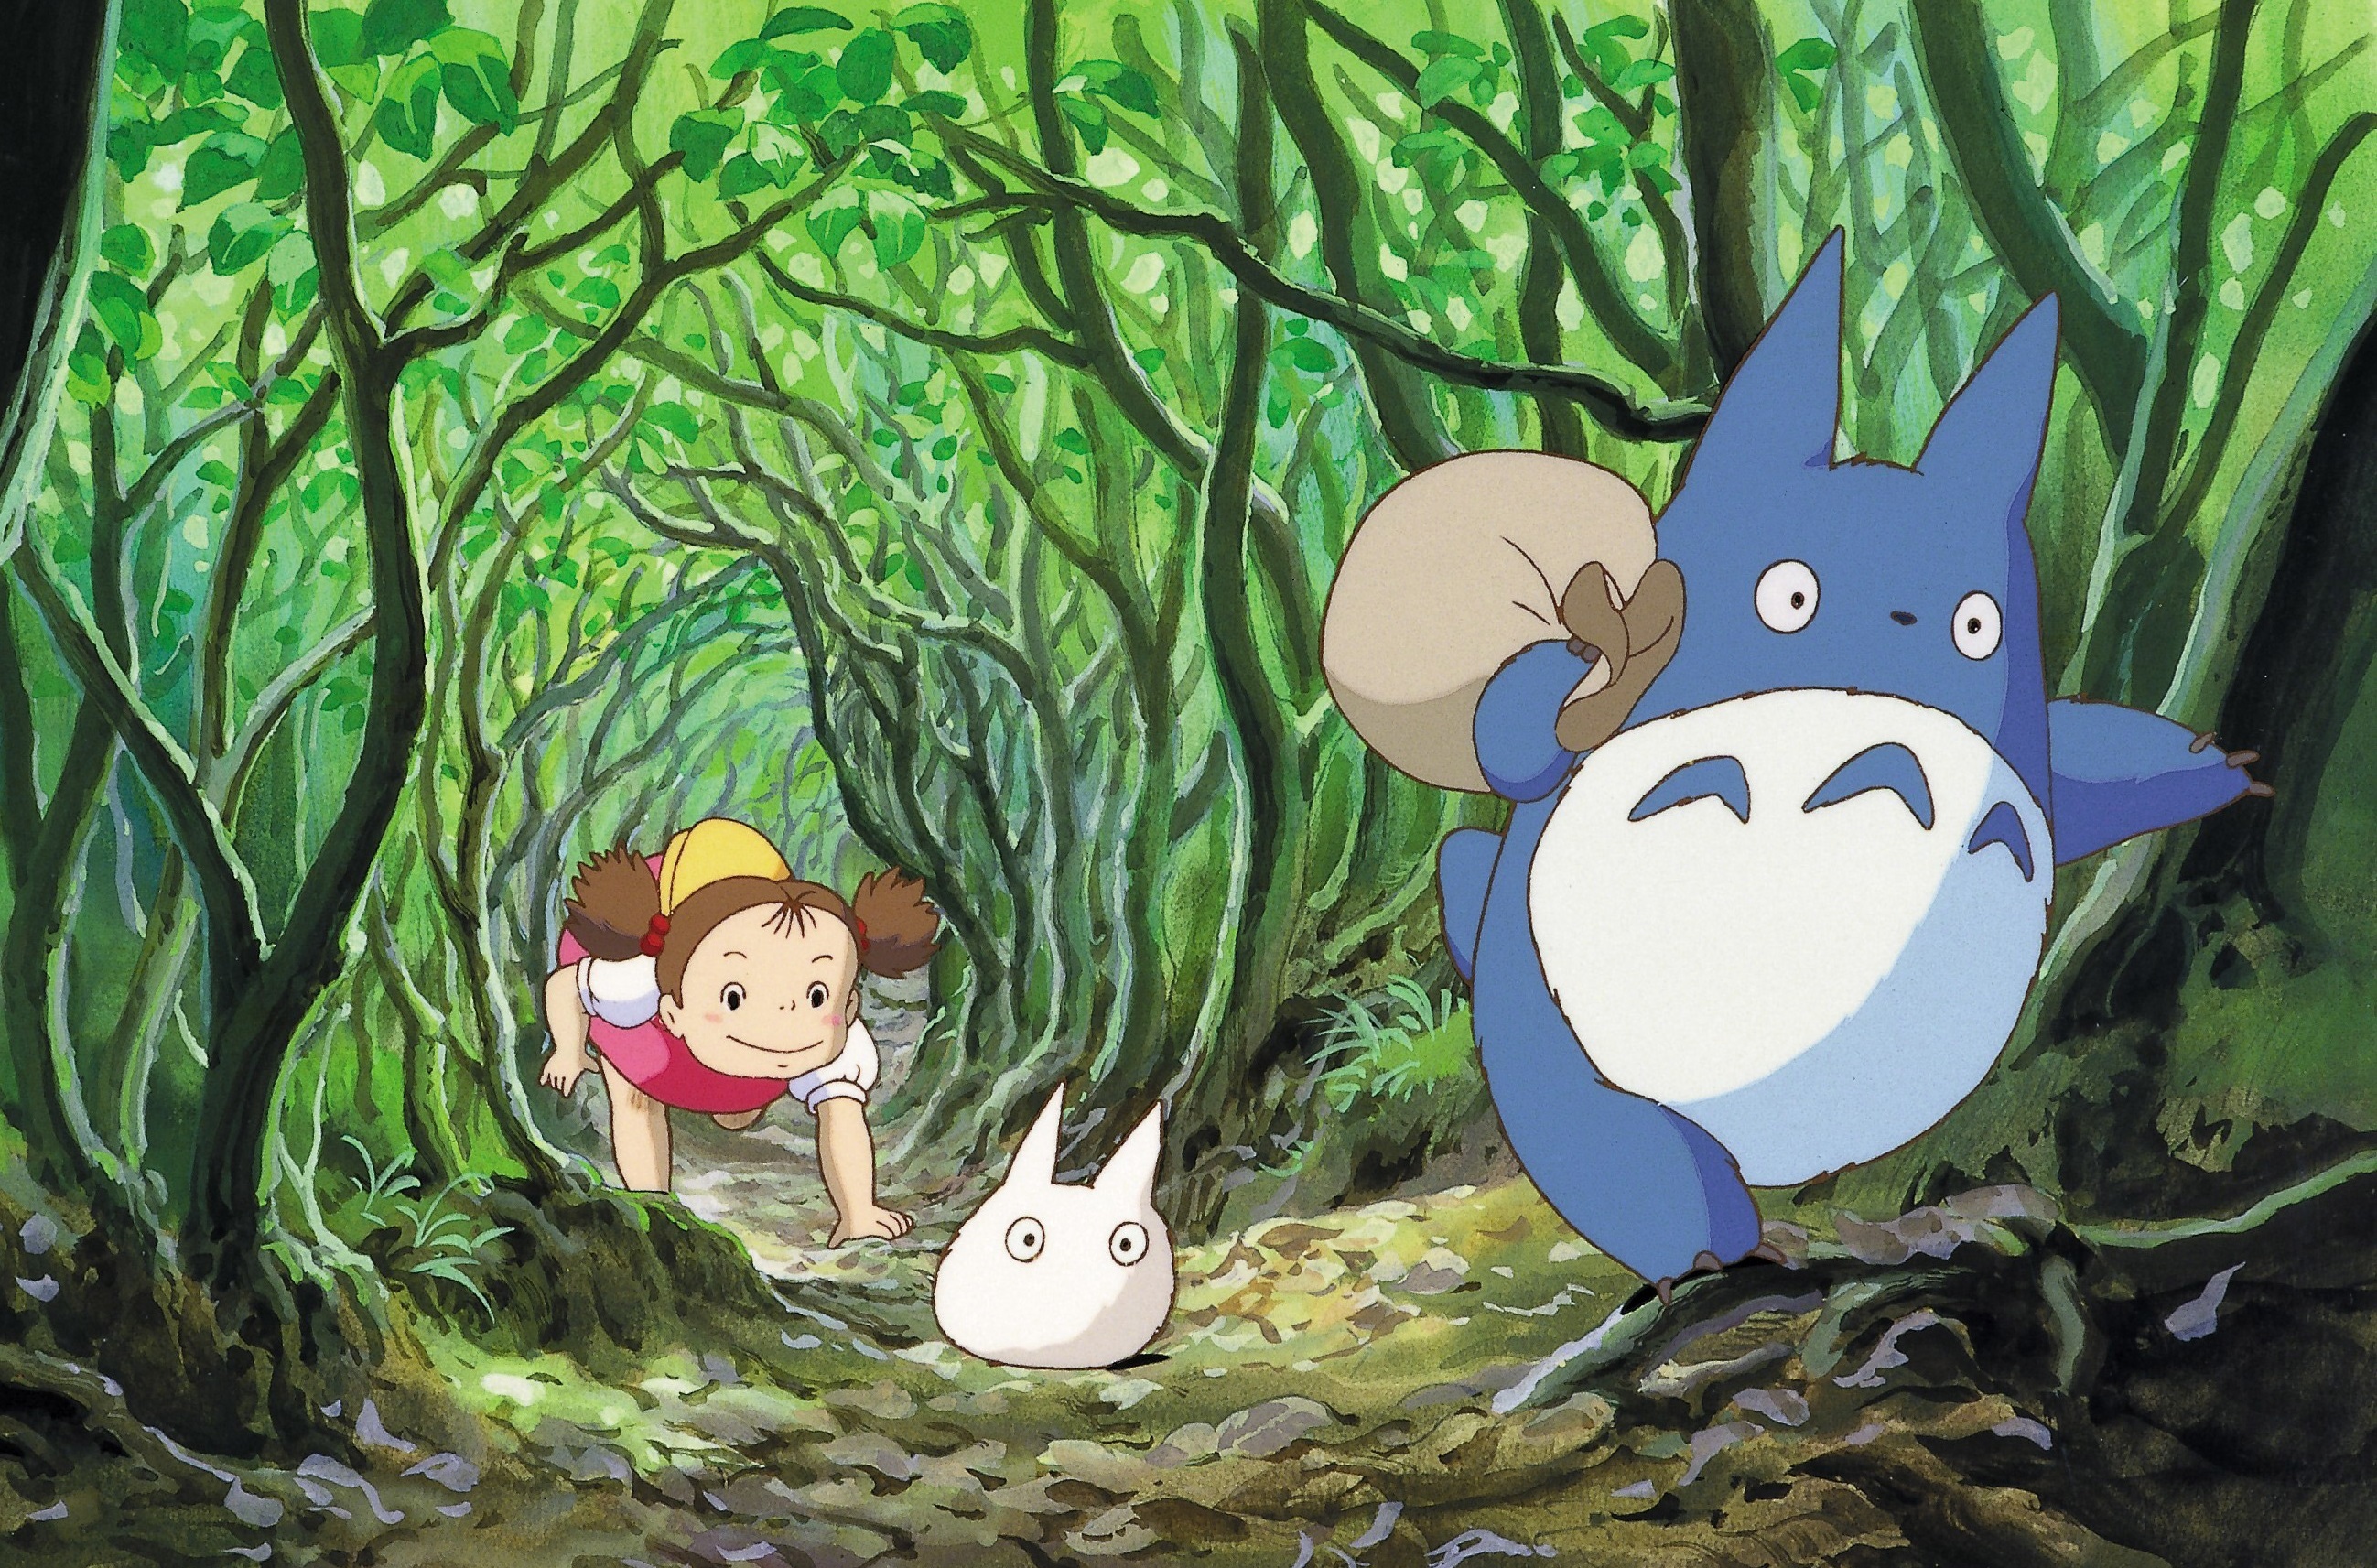 Studio Ghibli Director Is Confident in Earwig and the Witch